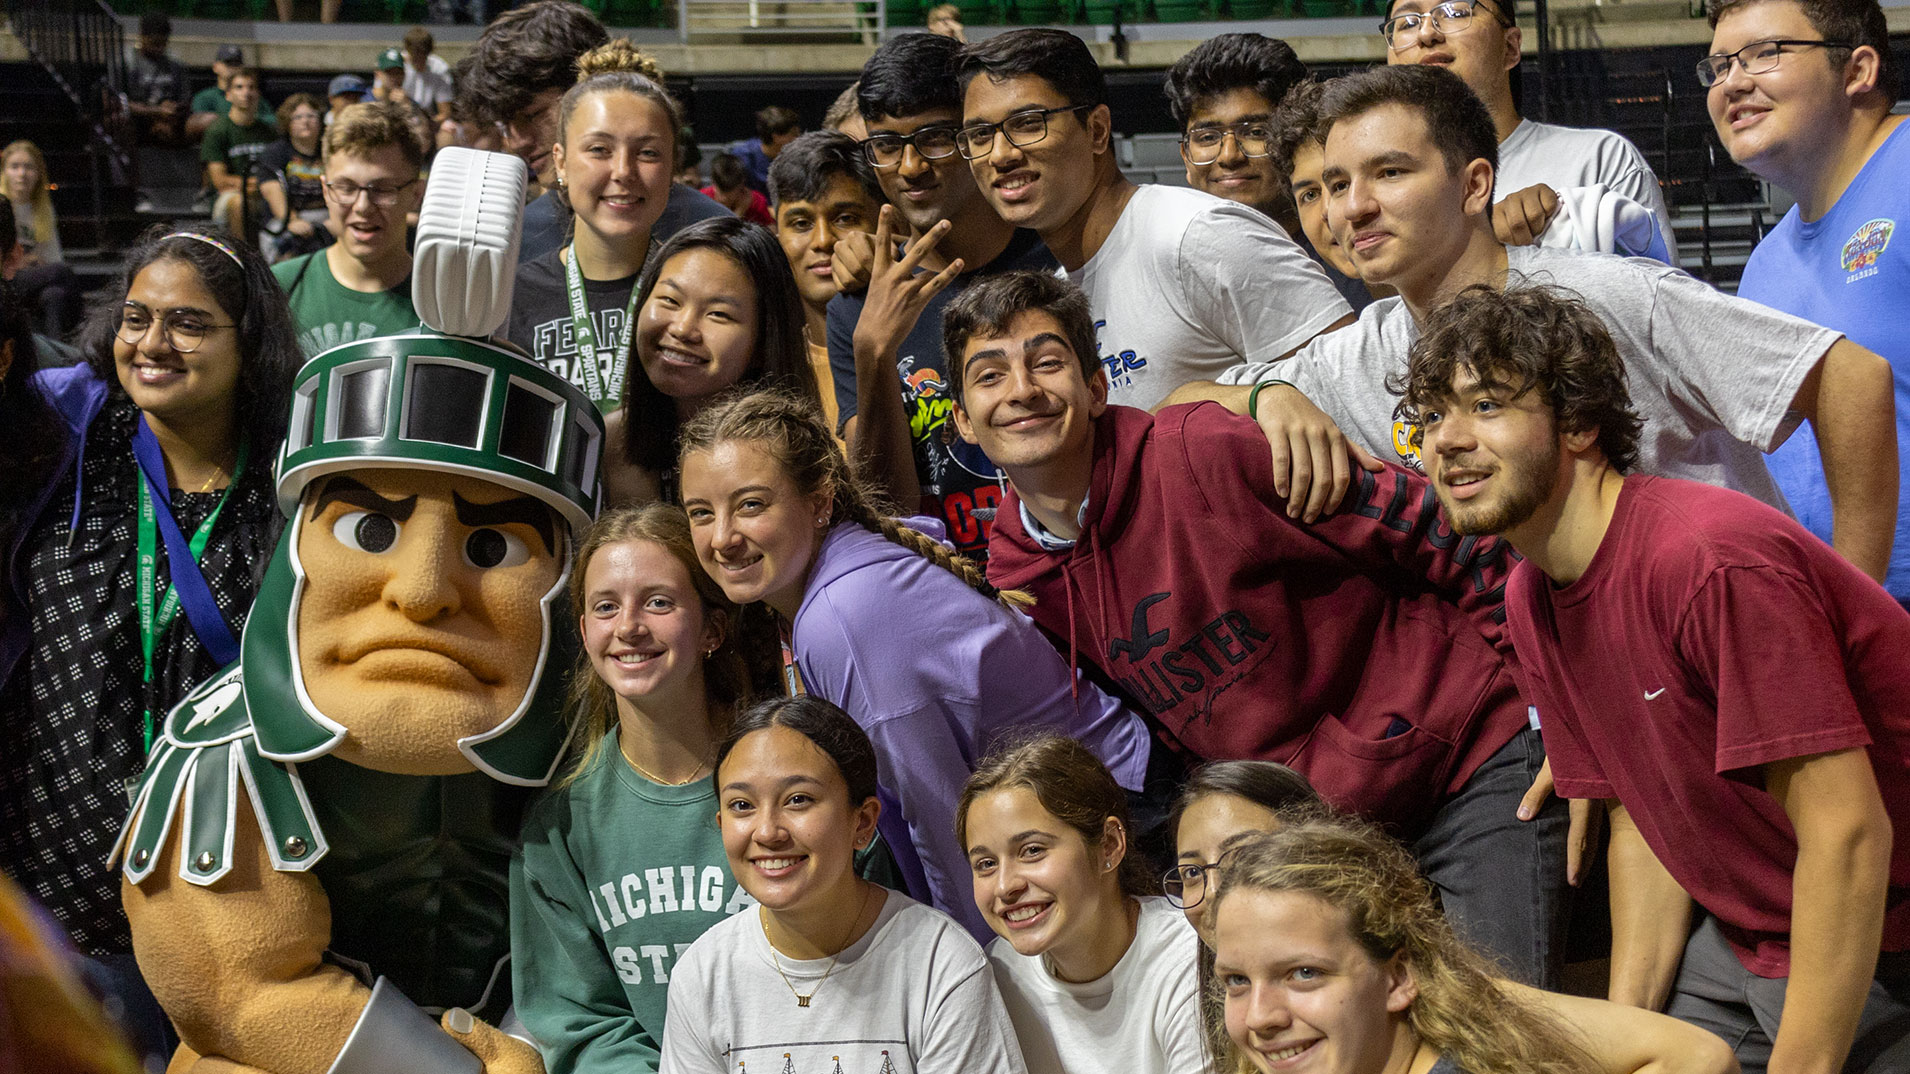 A group of students getting a photo with Sparty